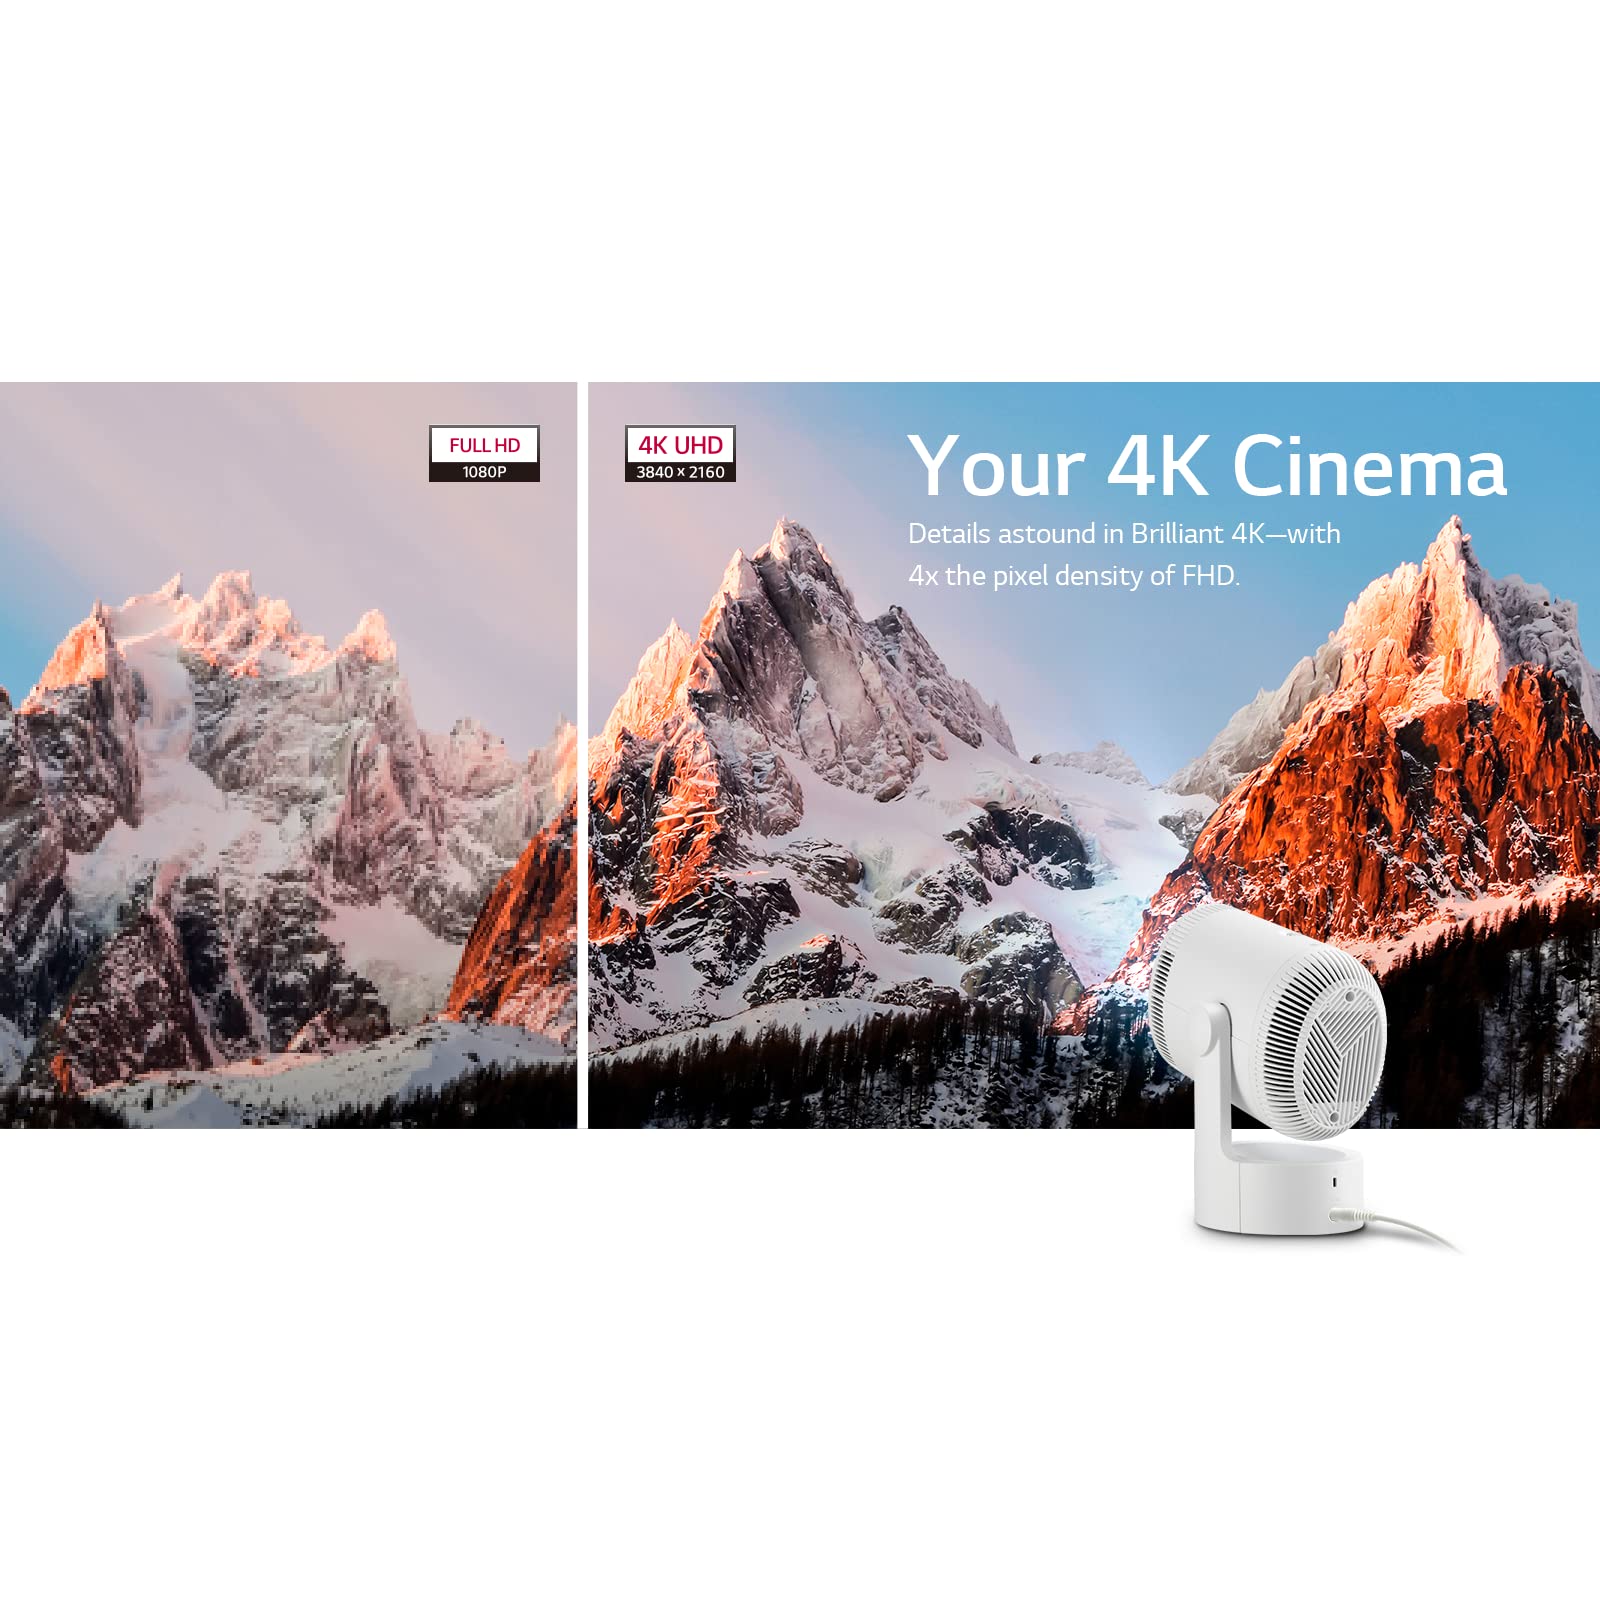 LG CineBeam Home Cinema PU700R 4K UHD Smart Projector, HDR10, 1000 Lumens, Auto Screen Adjustment with 90 Degree rotation, Airplay 2 support, Bluetooth Dual sound out, Mood lighting